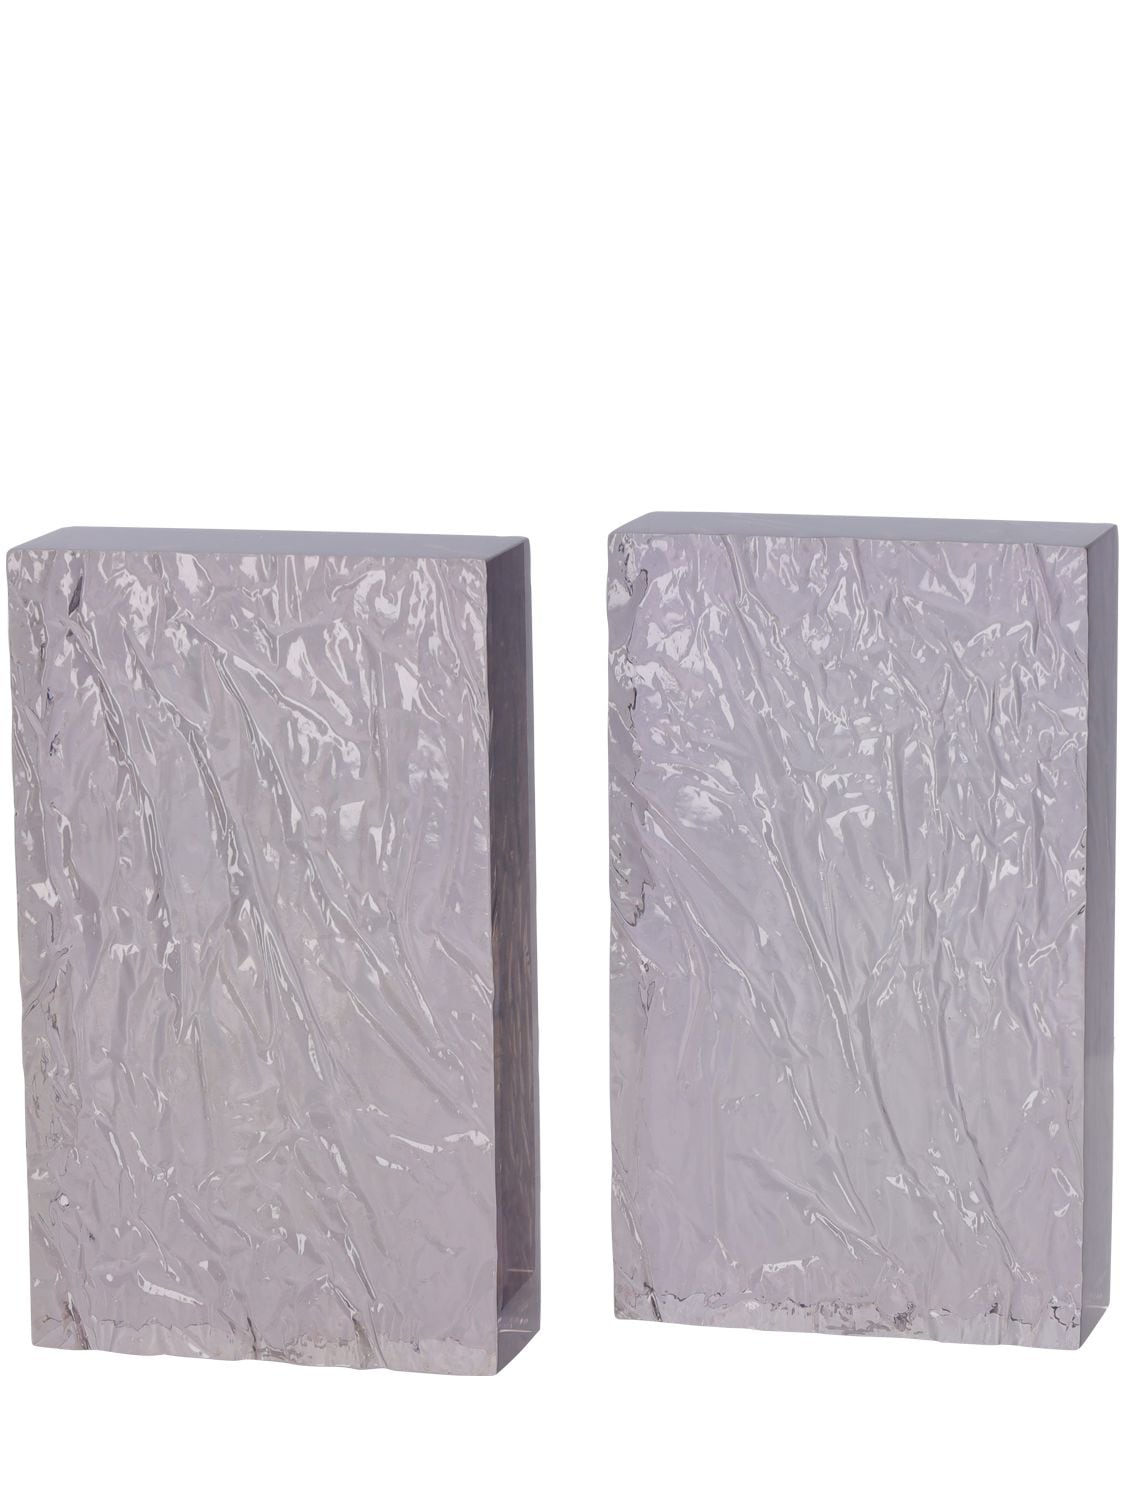 L'afshar Set Of 2 Crushed Iced Bookends In Transparent